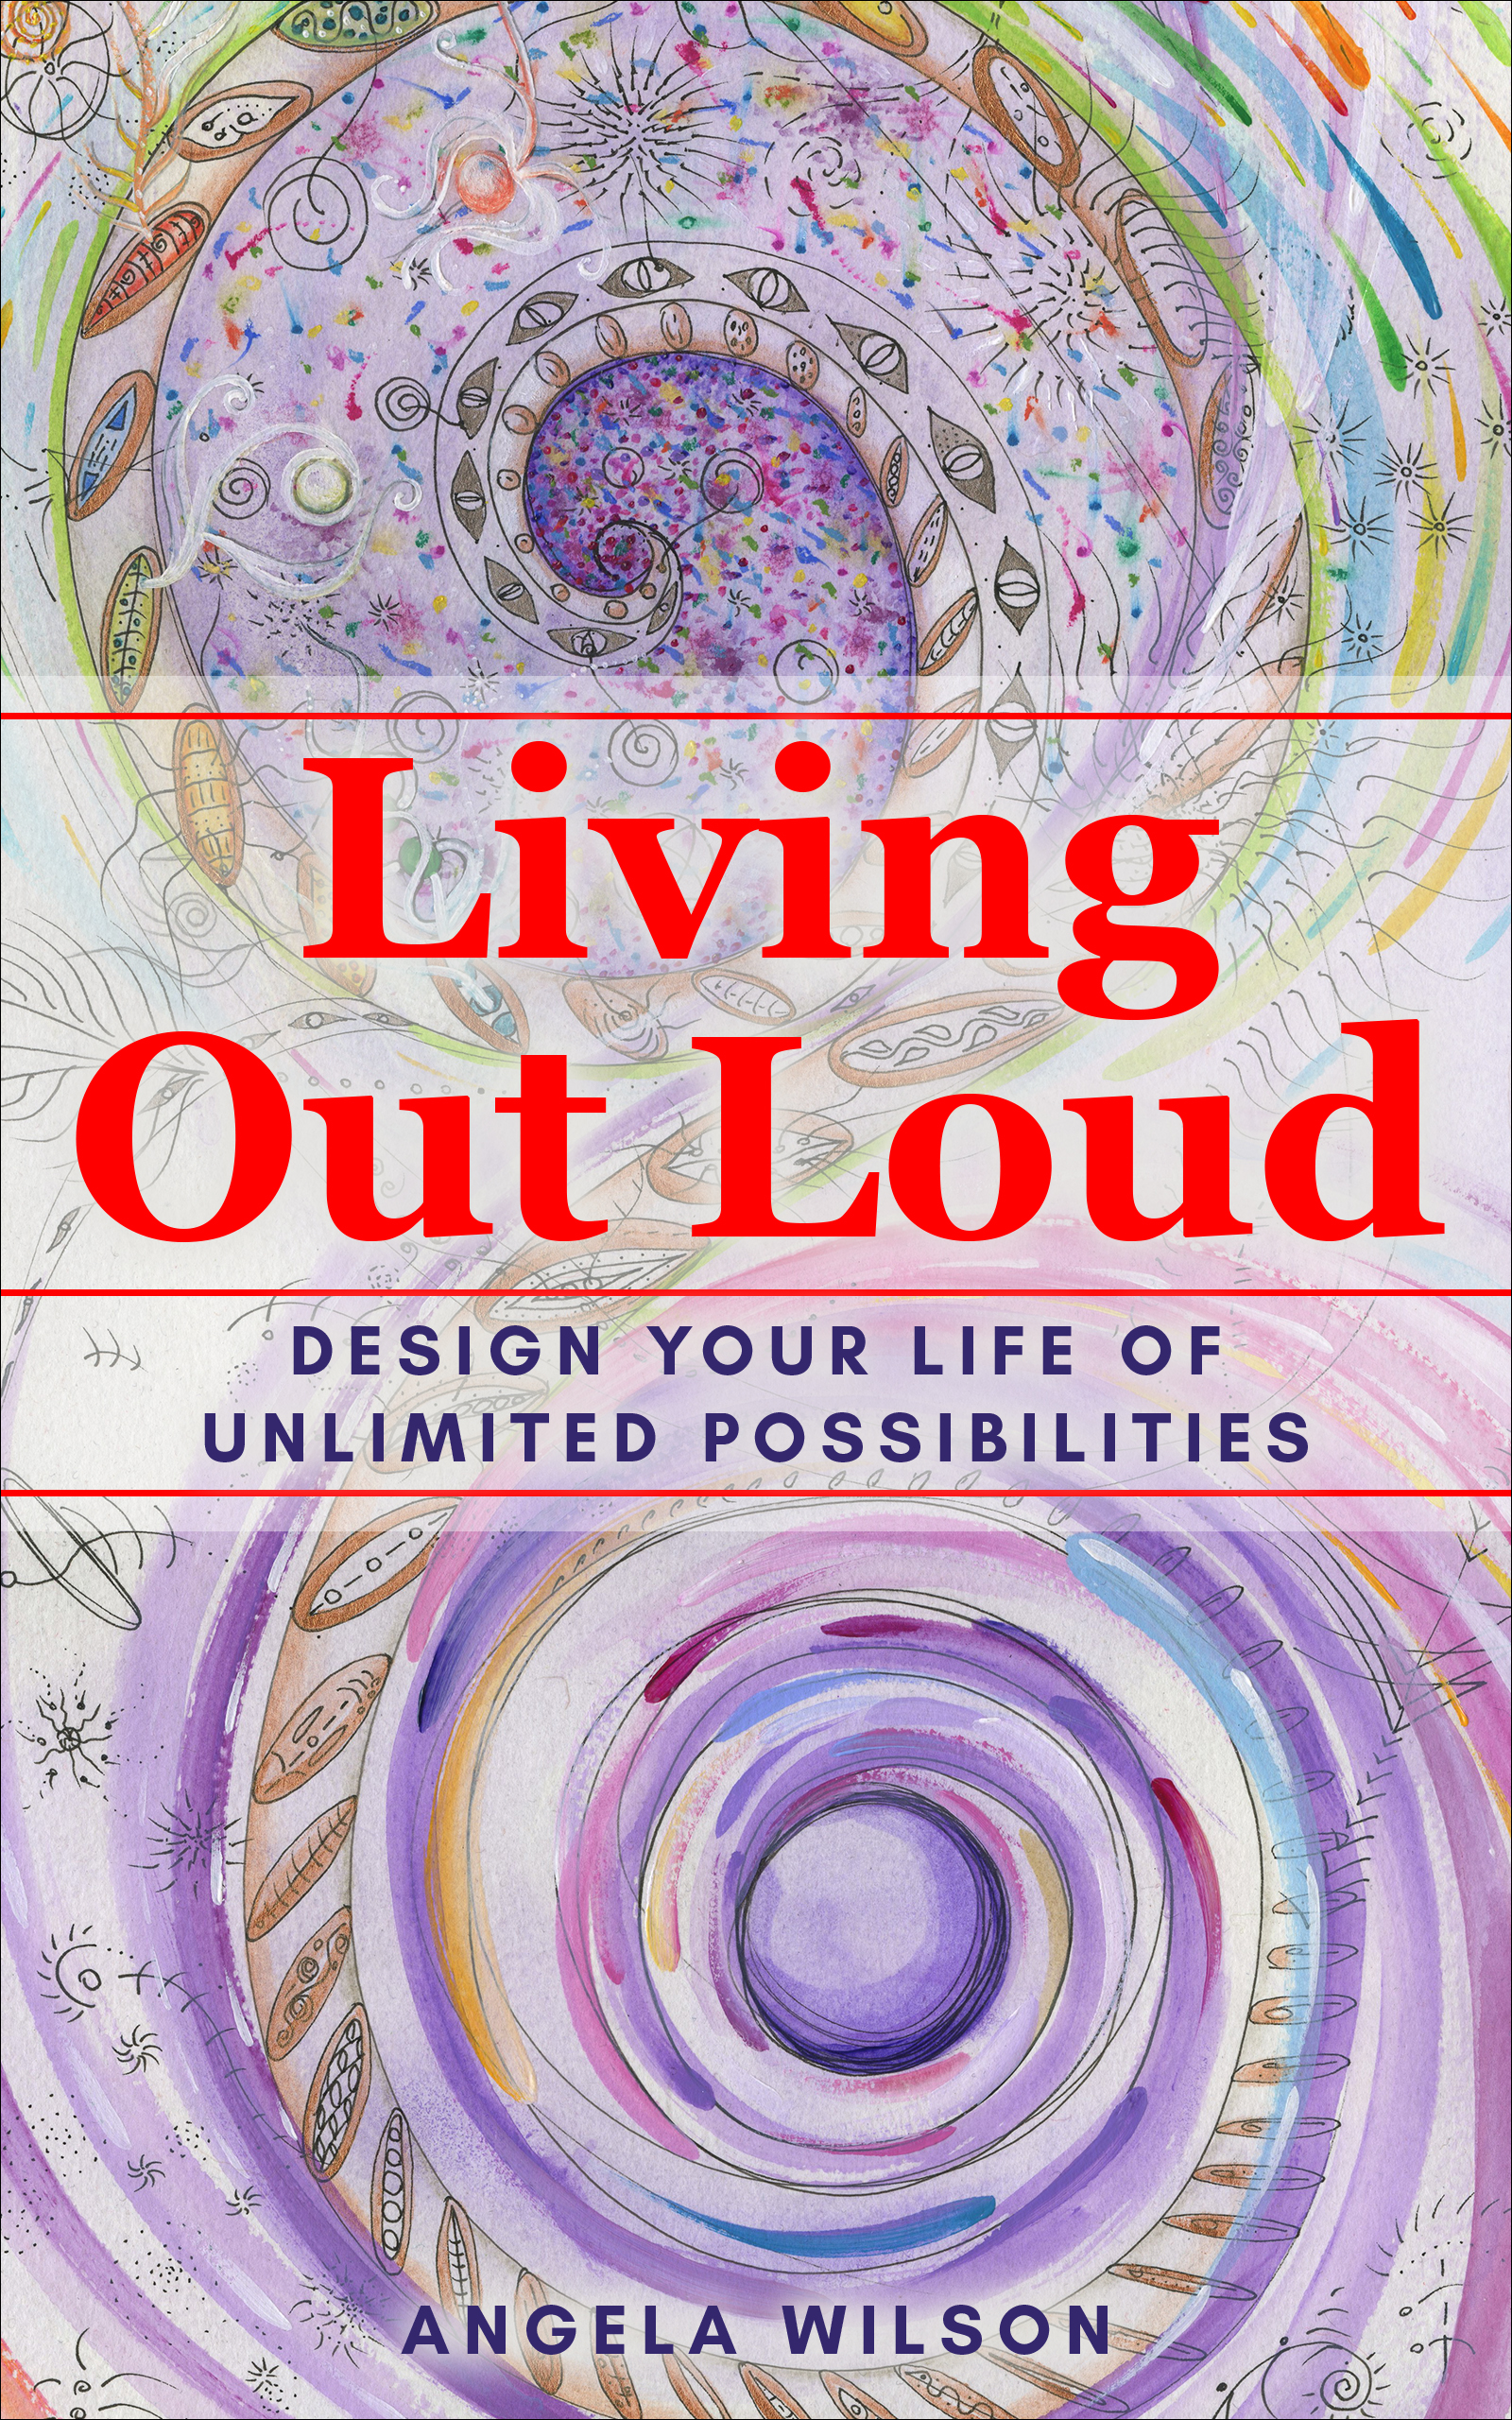 Living Out Loud by Angela Wilson _ Spotlight Publishing House